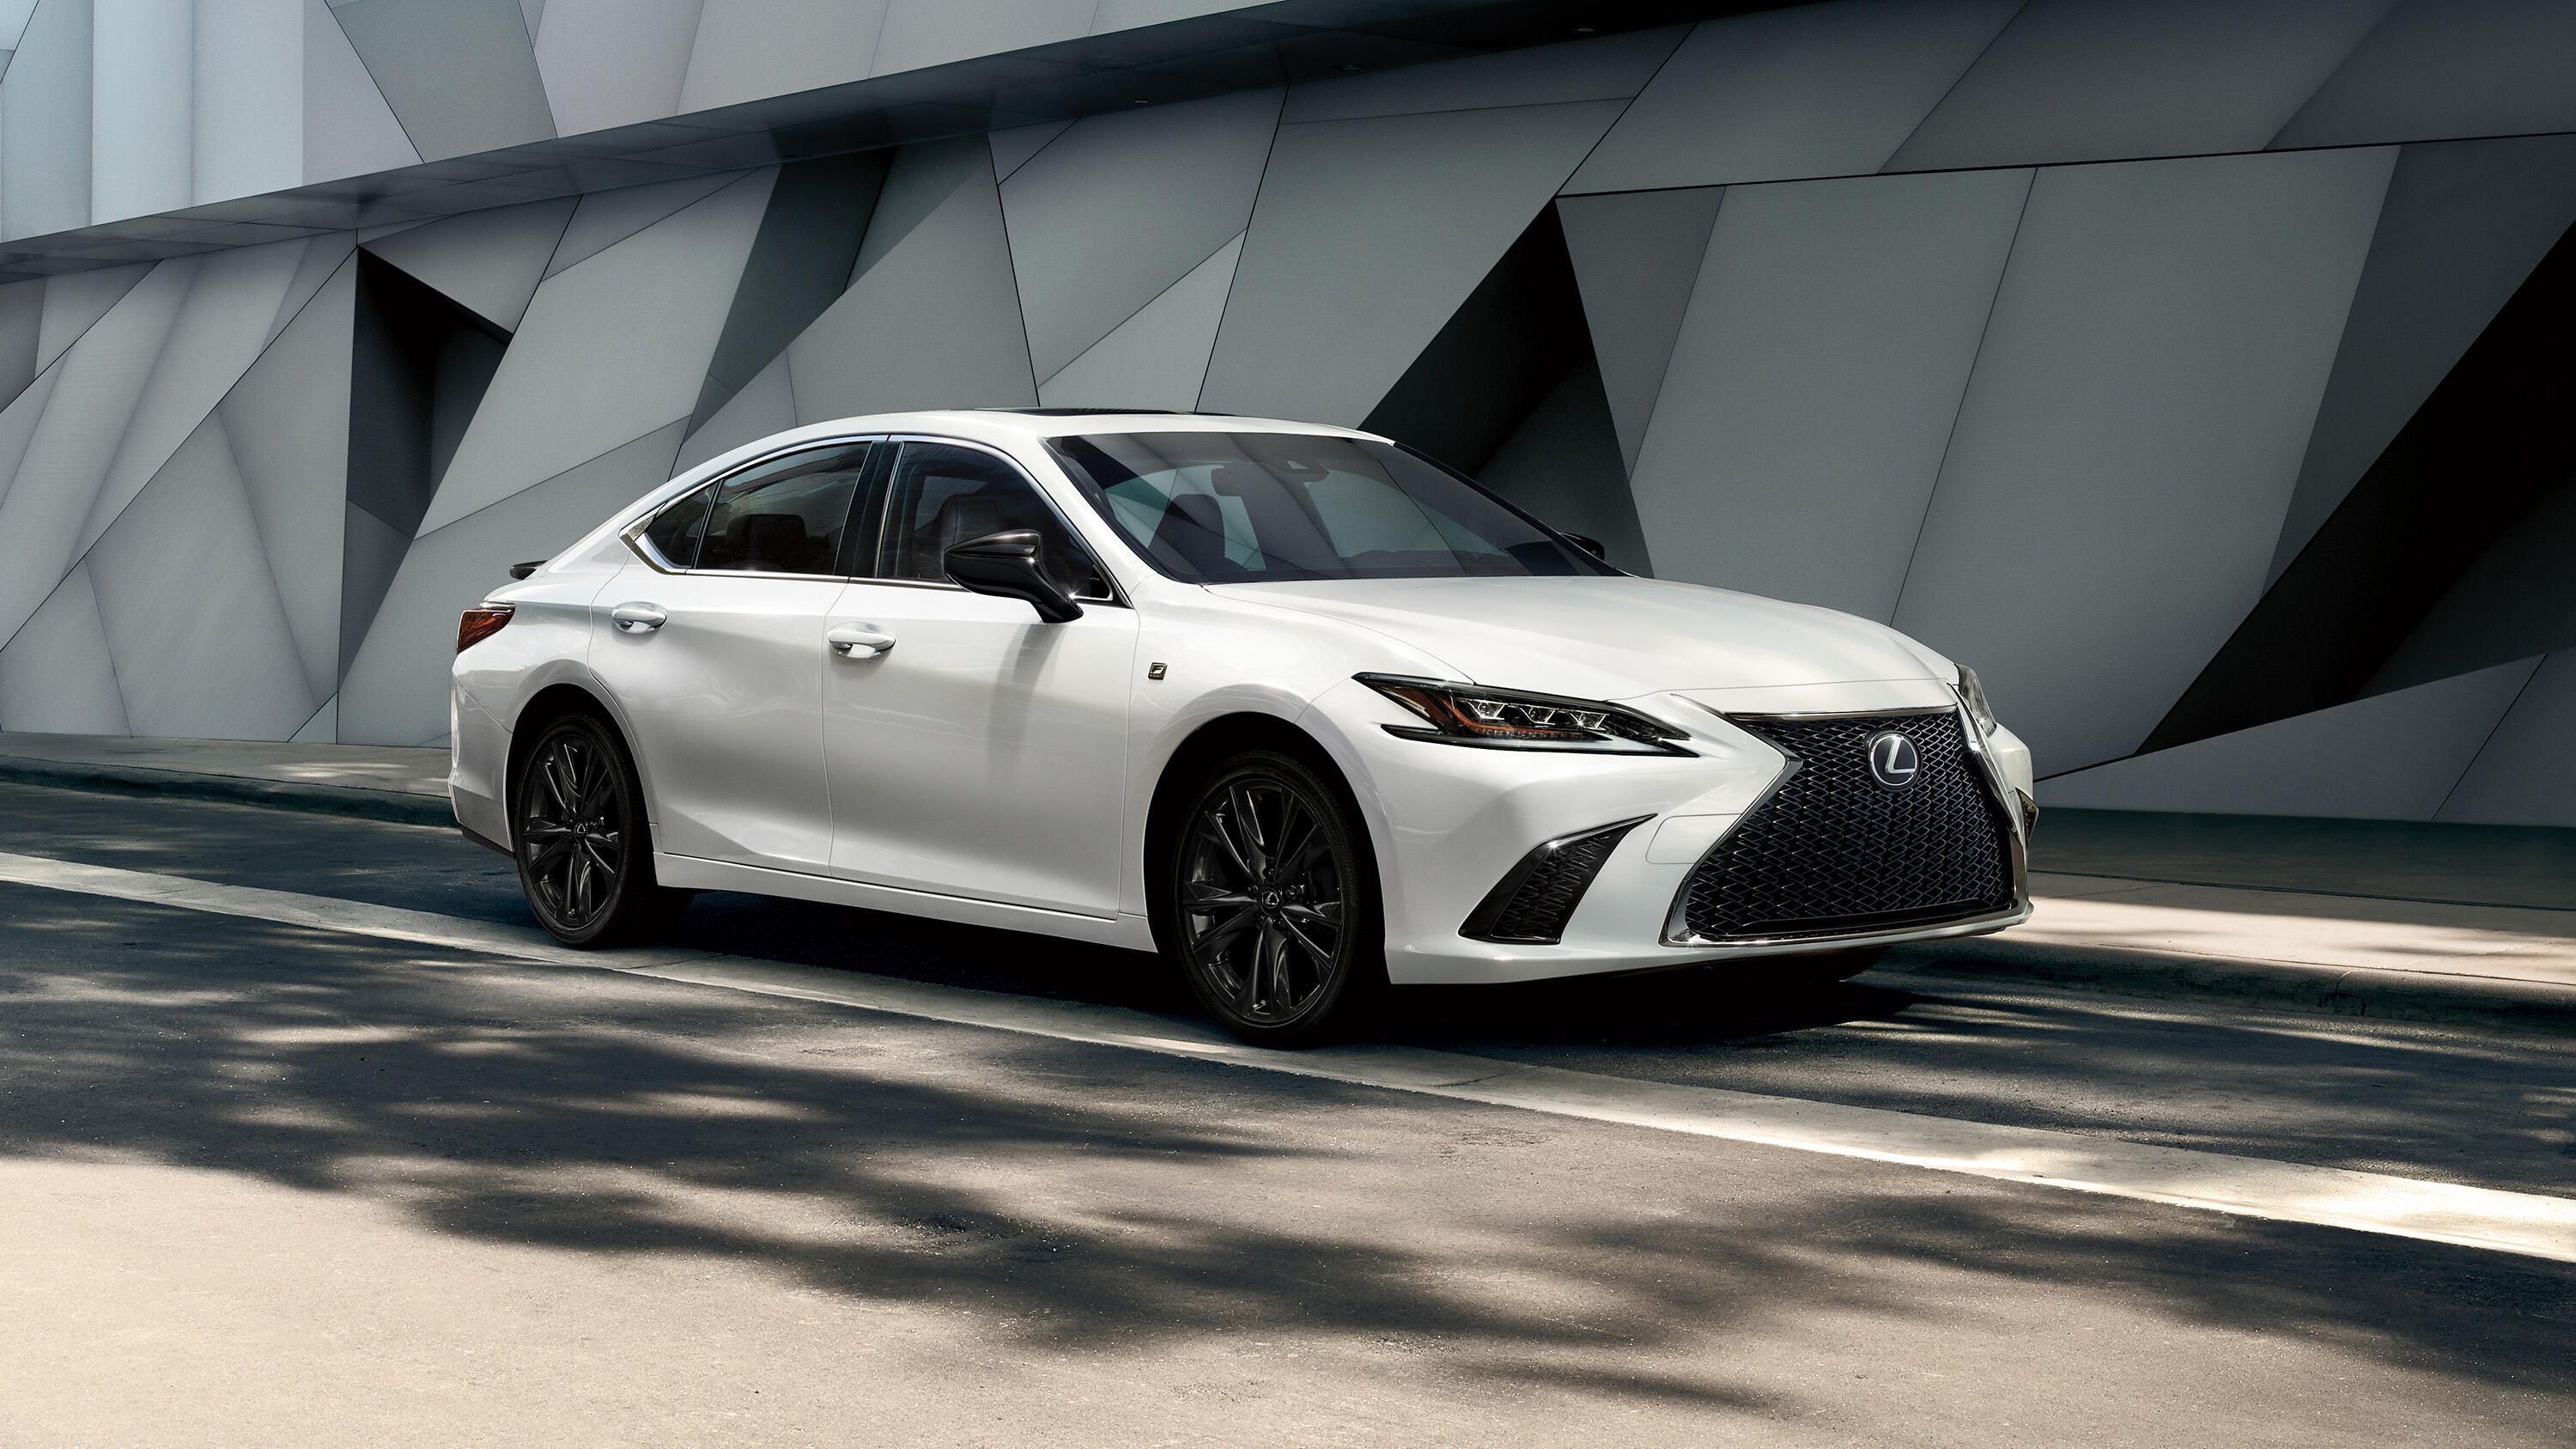 Lexus ES packs AWD grip and more attitude, but base prices hold steady